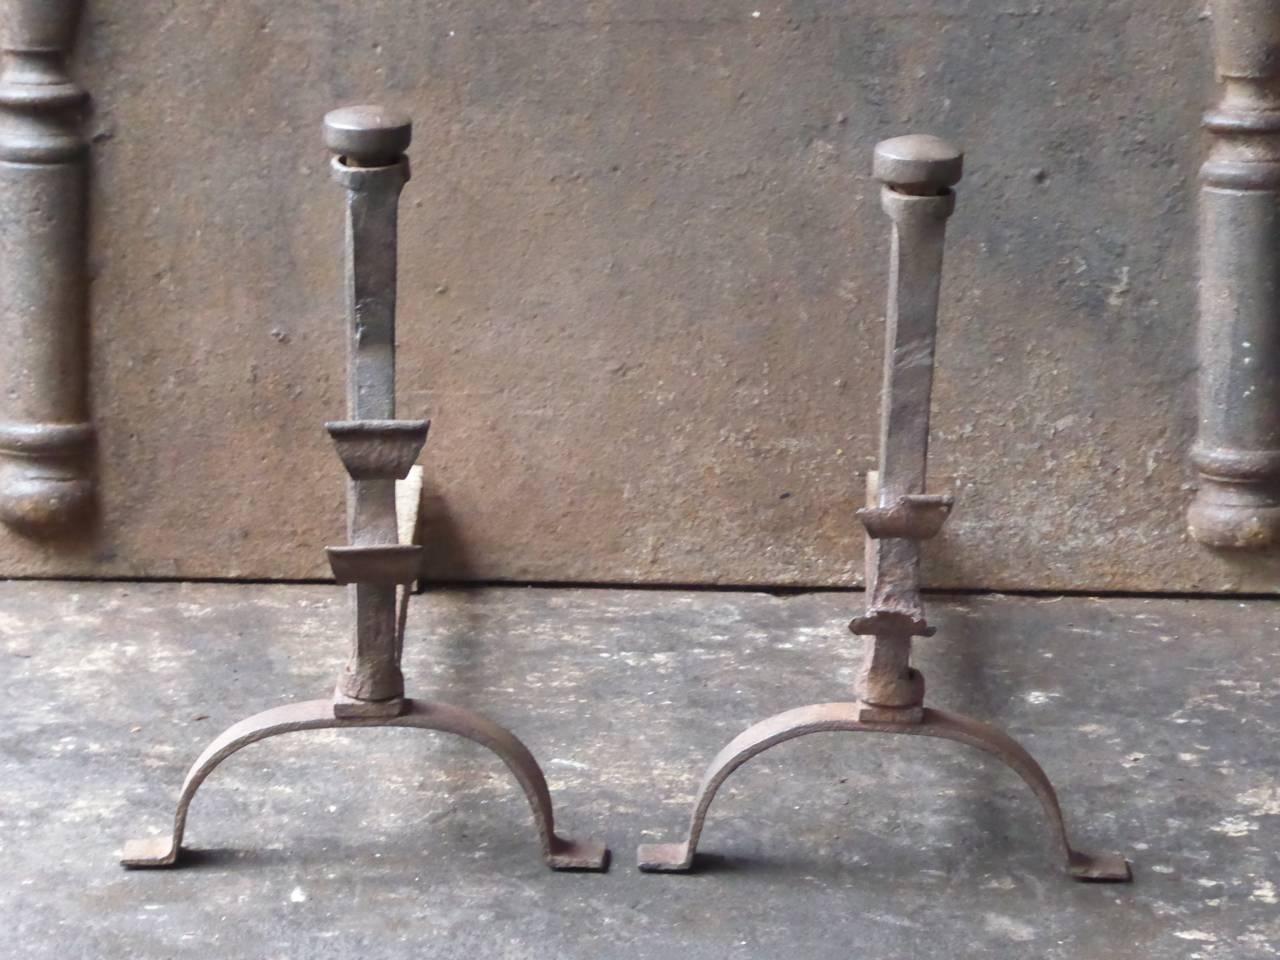 18th century French andirons with spit hooks to grill food.